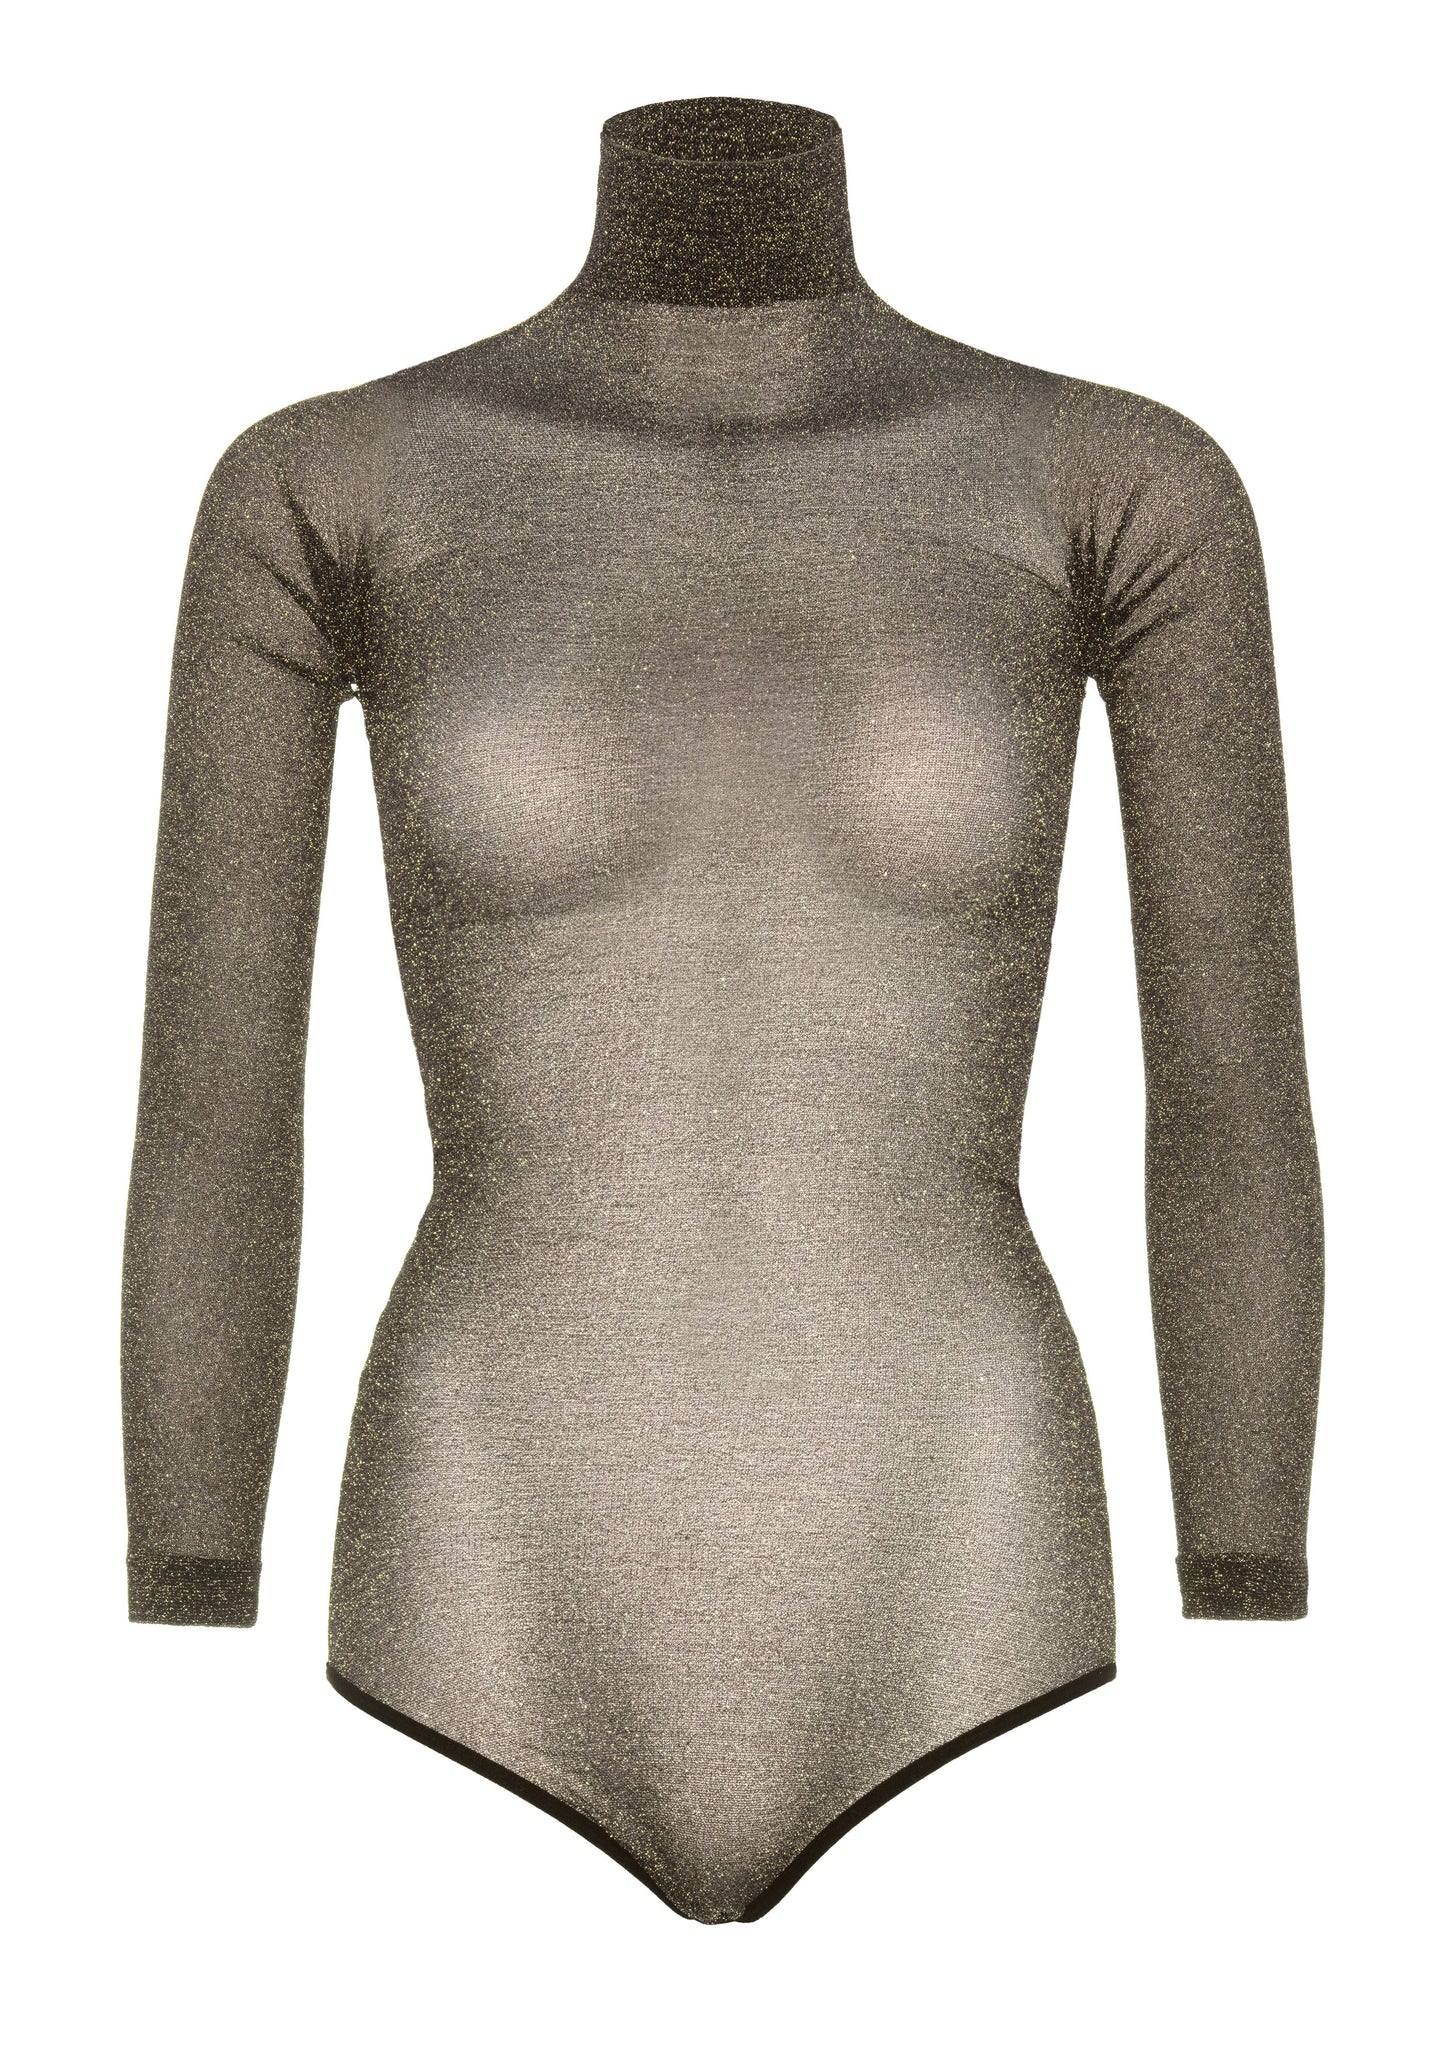 Leg Avenue 89242 Lurex Bodysuit - Black semi-opaque turtle neck long sleeved body-top with gold sparkly lame' throughout and snap fastener closures, perfect for the party season. Please note that this item is transparent and made from a nylon tights material.